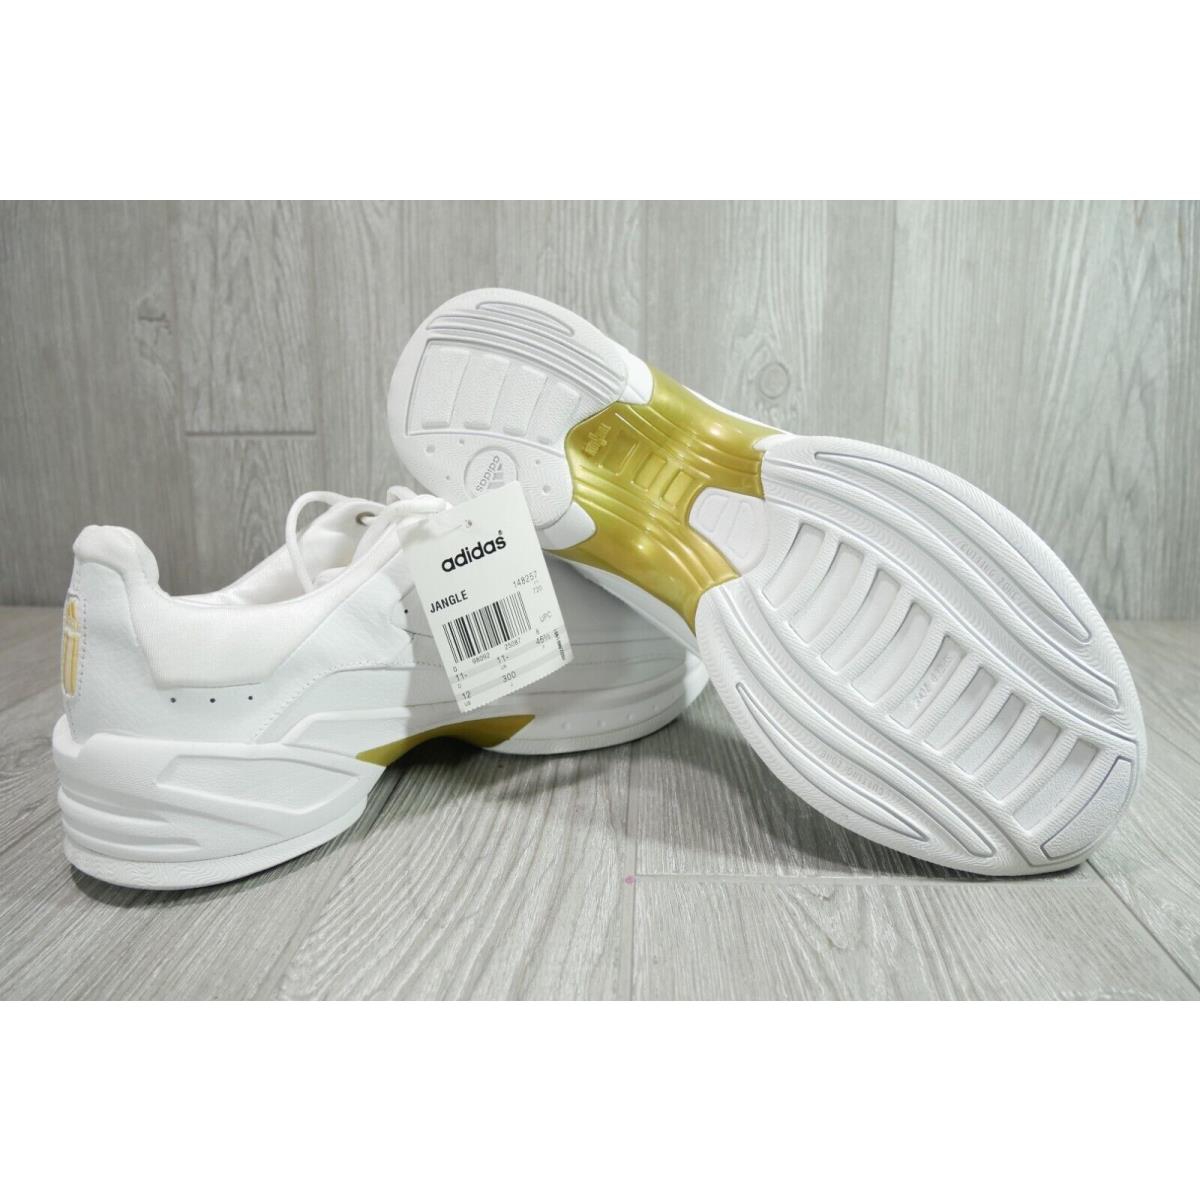 Adidas shoes Trainer - White 4